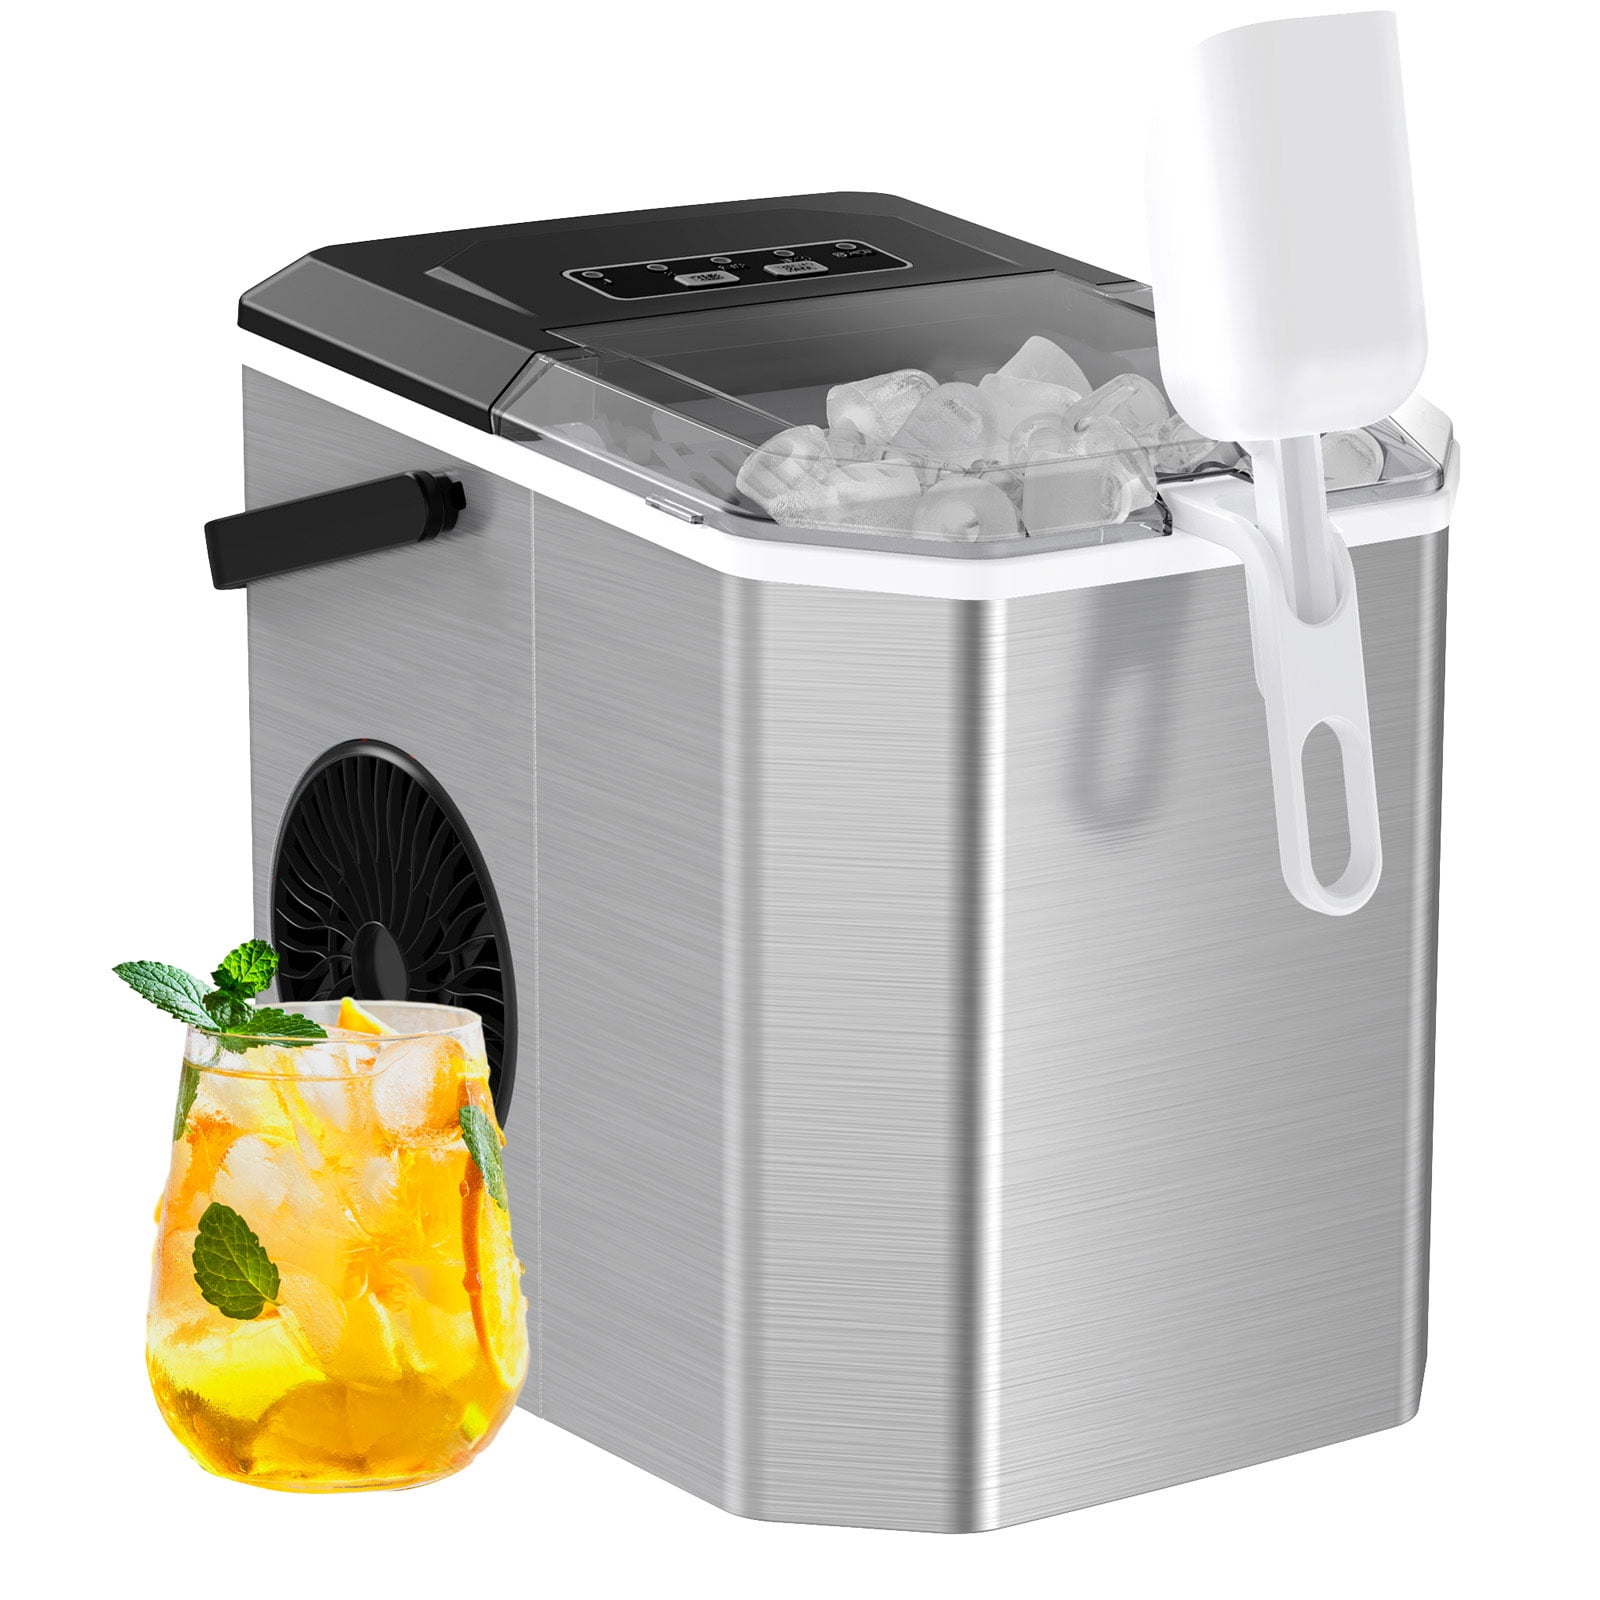 hOmeLabs Portable Countertop Ice Maker — Tools and Toys